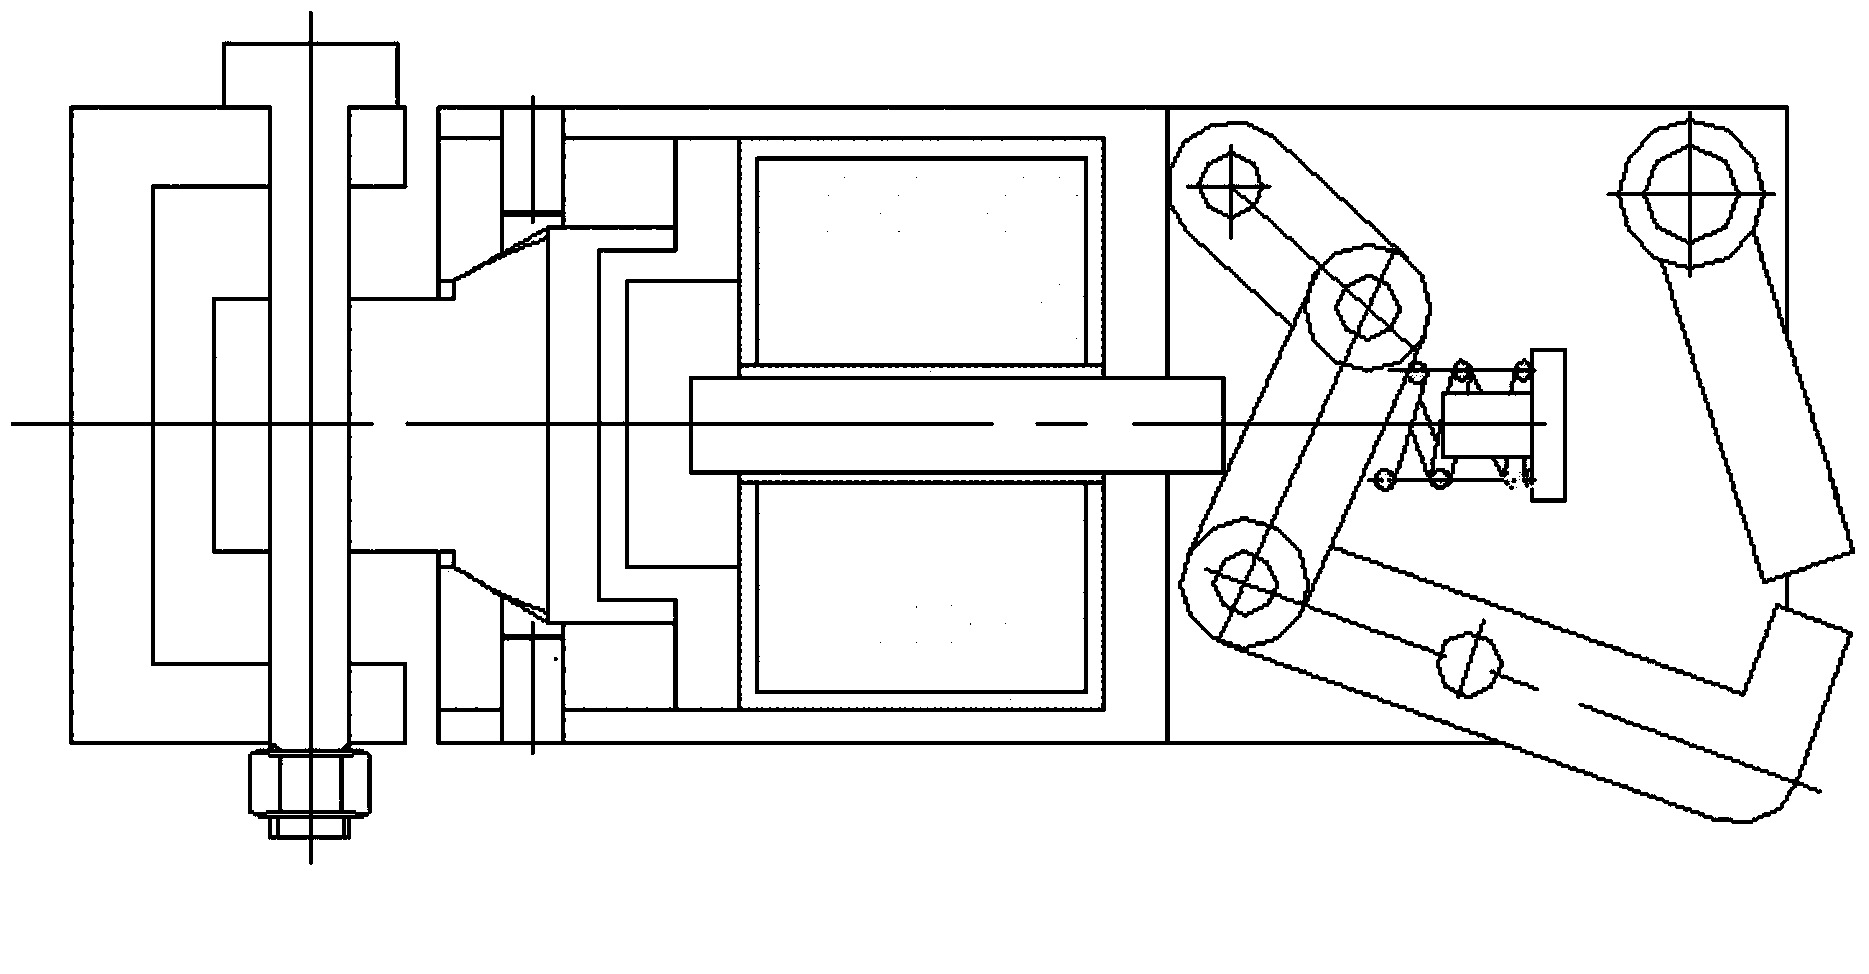 Electric control separation mechanism of unmanned aerial vehicle and parachute